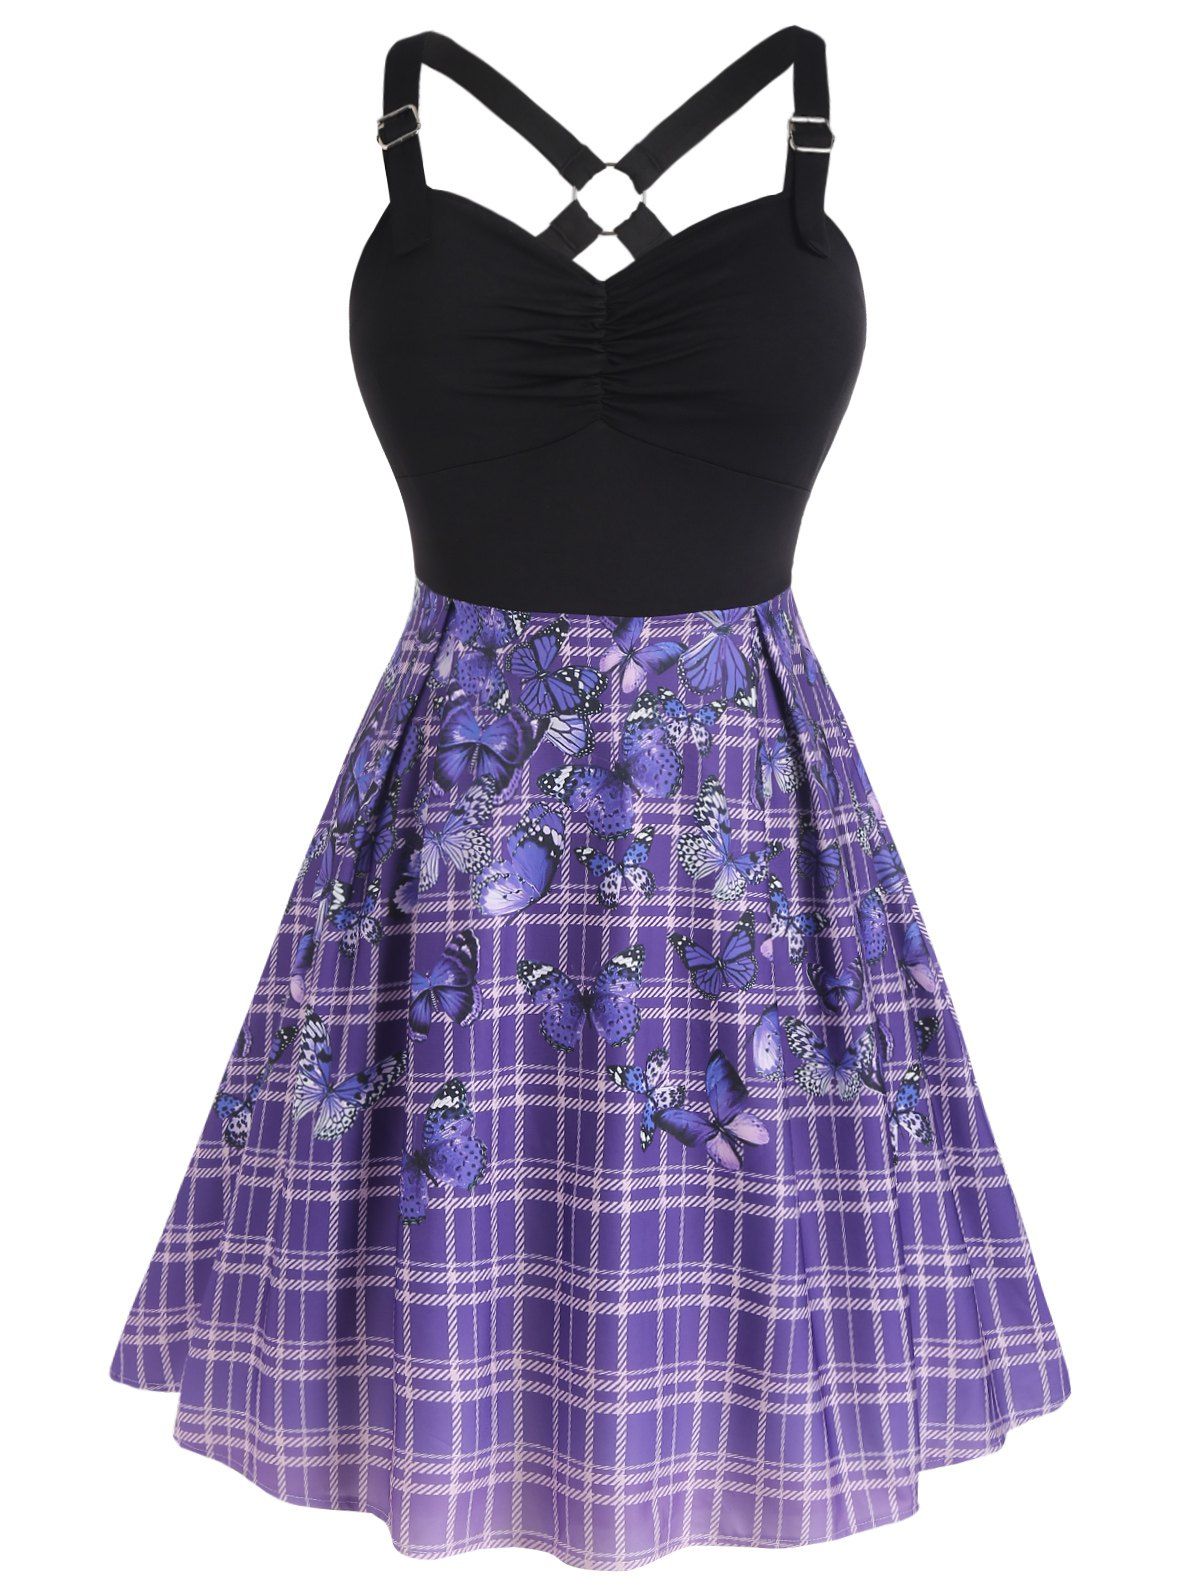 Plus Size Dress Butterfly Plaid Print High Waisted Dress O Ring Ruched A Line Dress - PURPLE 3X